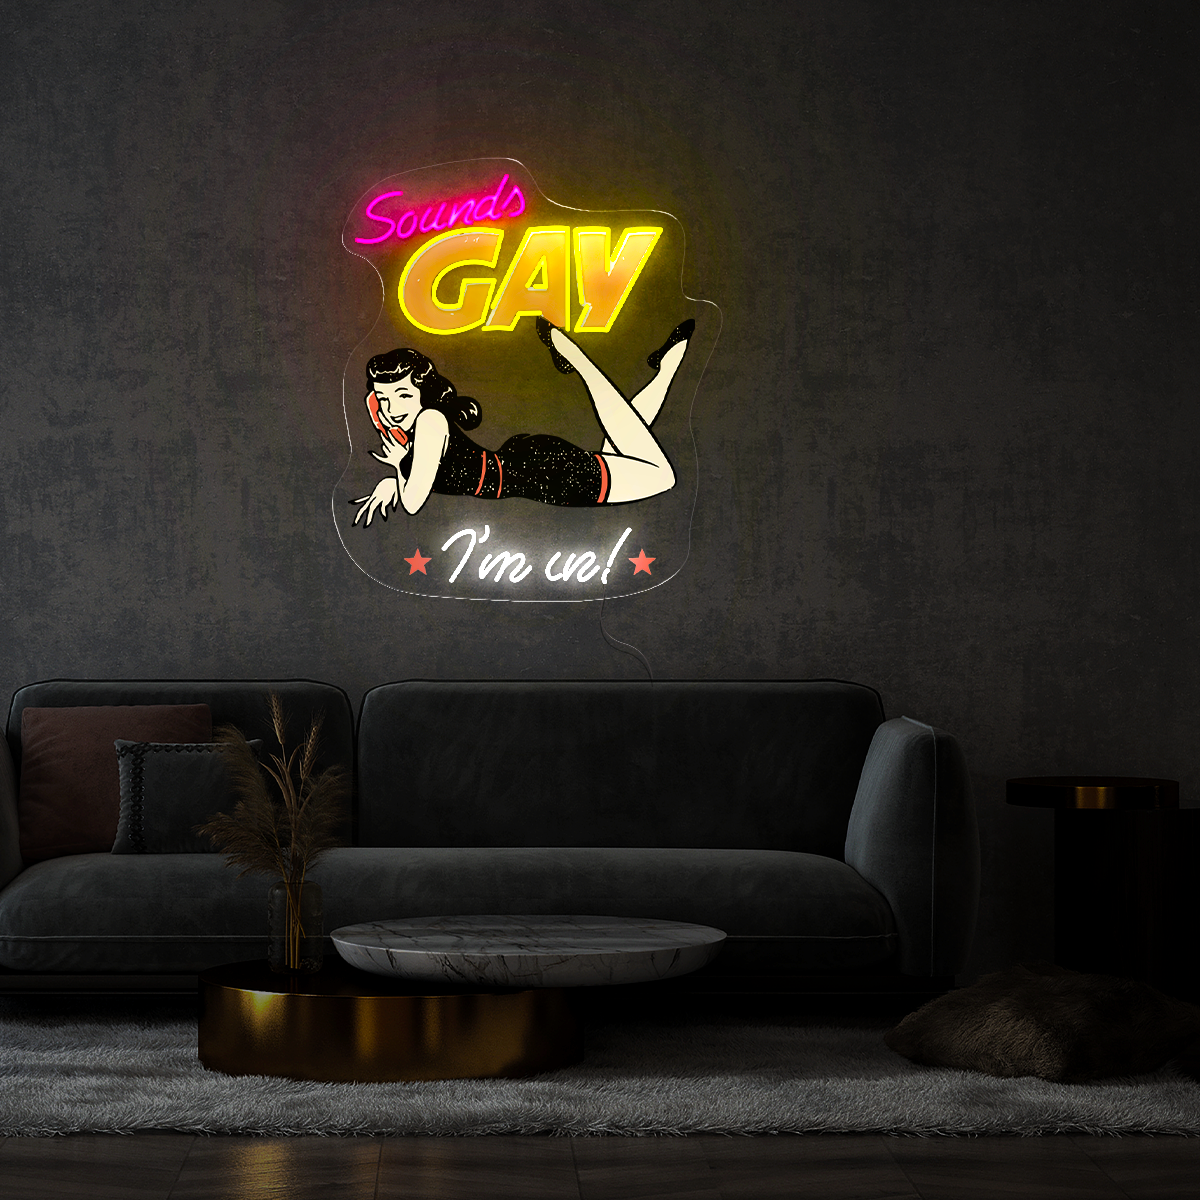 Sounds Gay I'm In Artwork Neon Sign